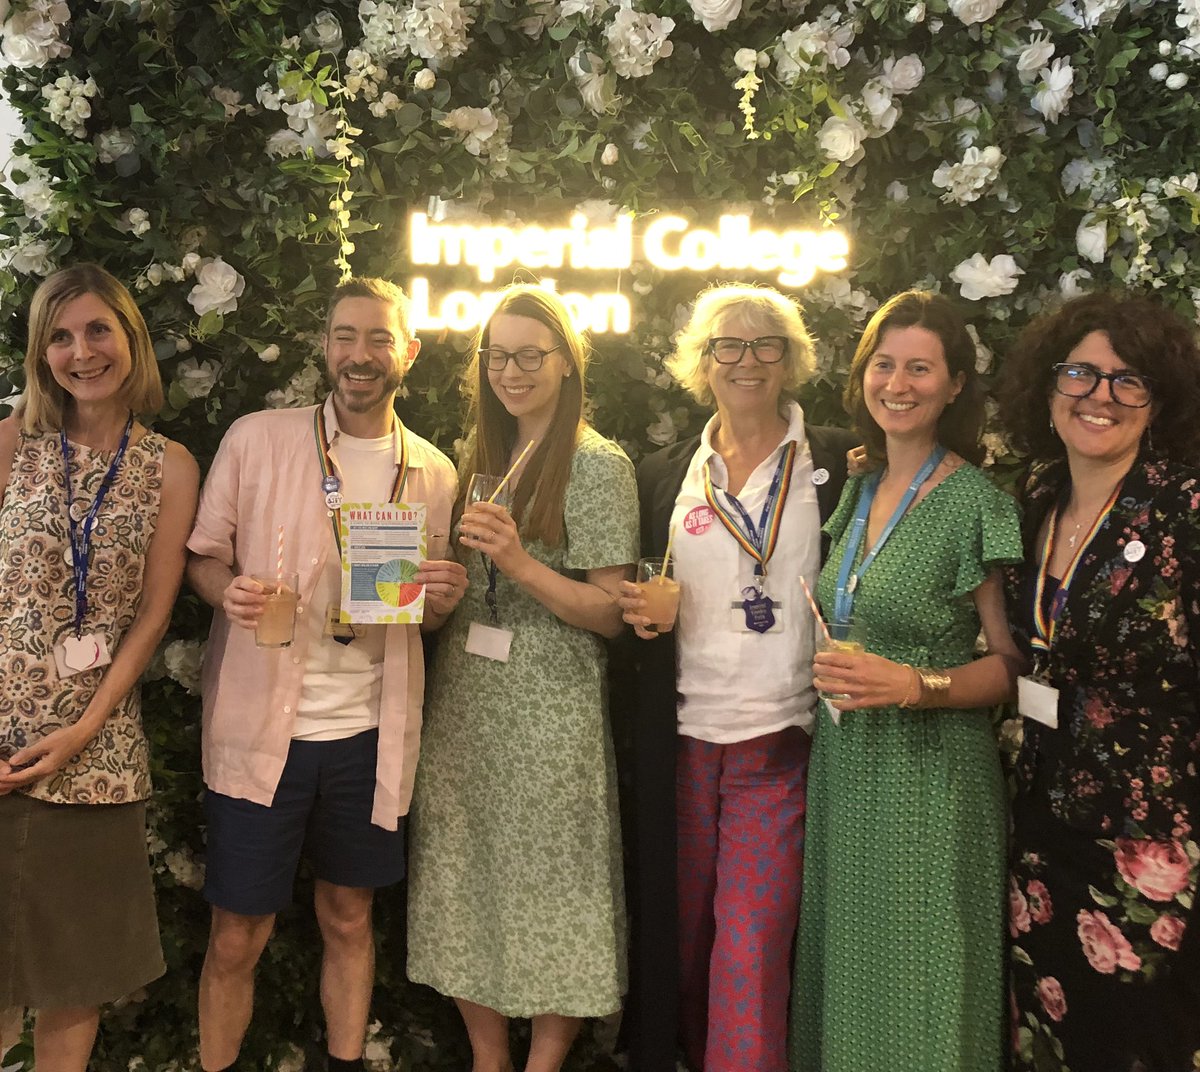 Hurrah for Collegiality! We won a Presidential award for the joint effort to produce @Grantham_IC ‘s #PopUpKitchen. @IC_CEP @ImperialSci @ImperialSPH @cvrinten